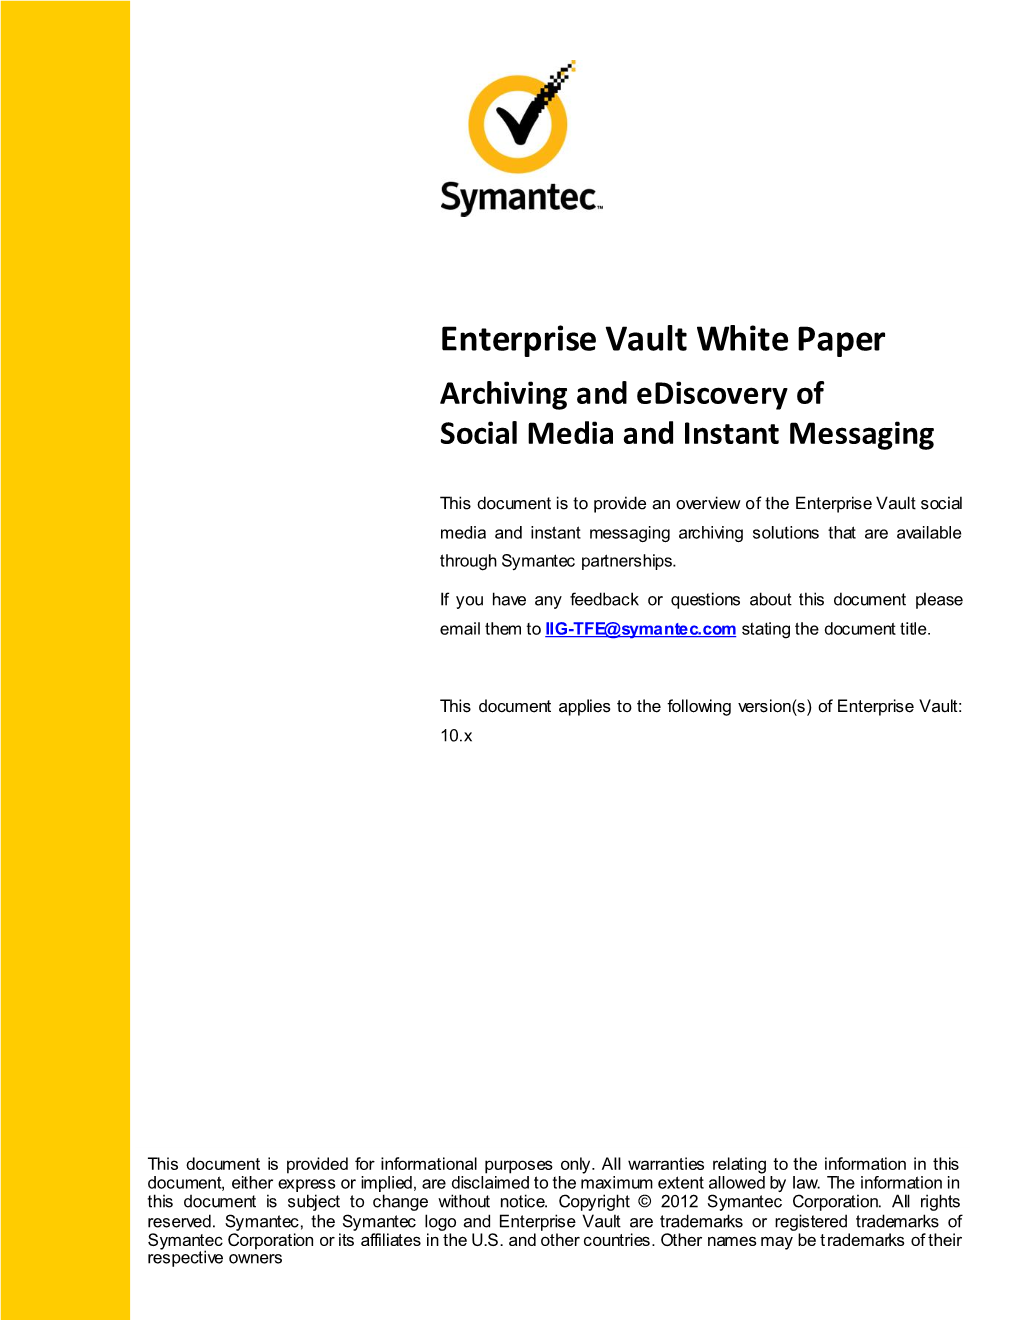 Enterprise Vault White Paper Archiving and Ediscovery of Social Media and Instant Messaging